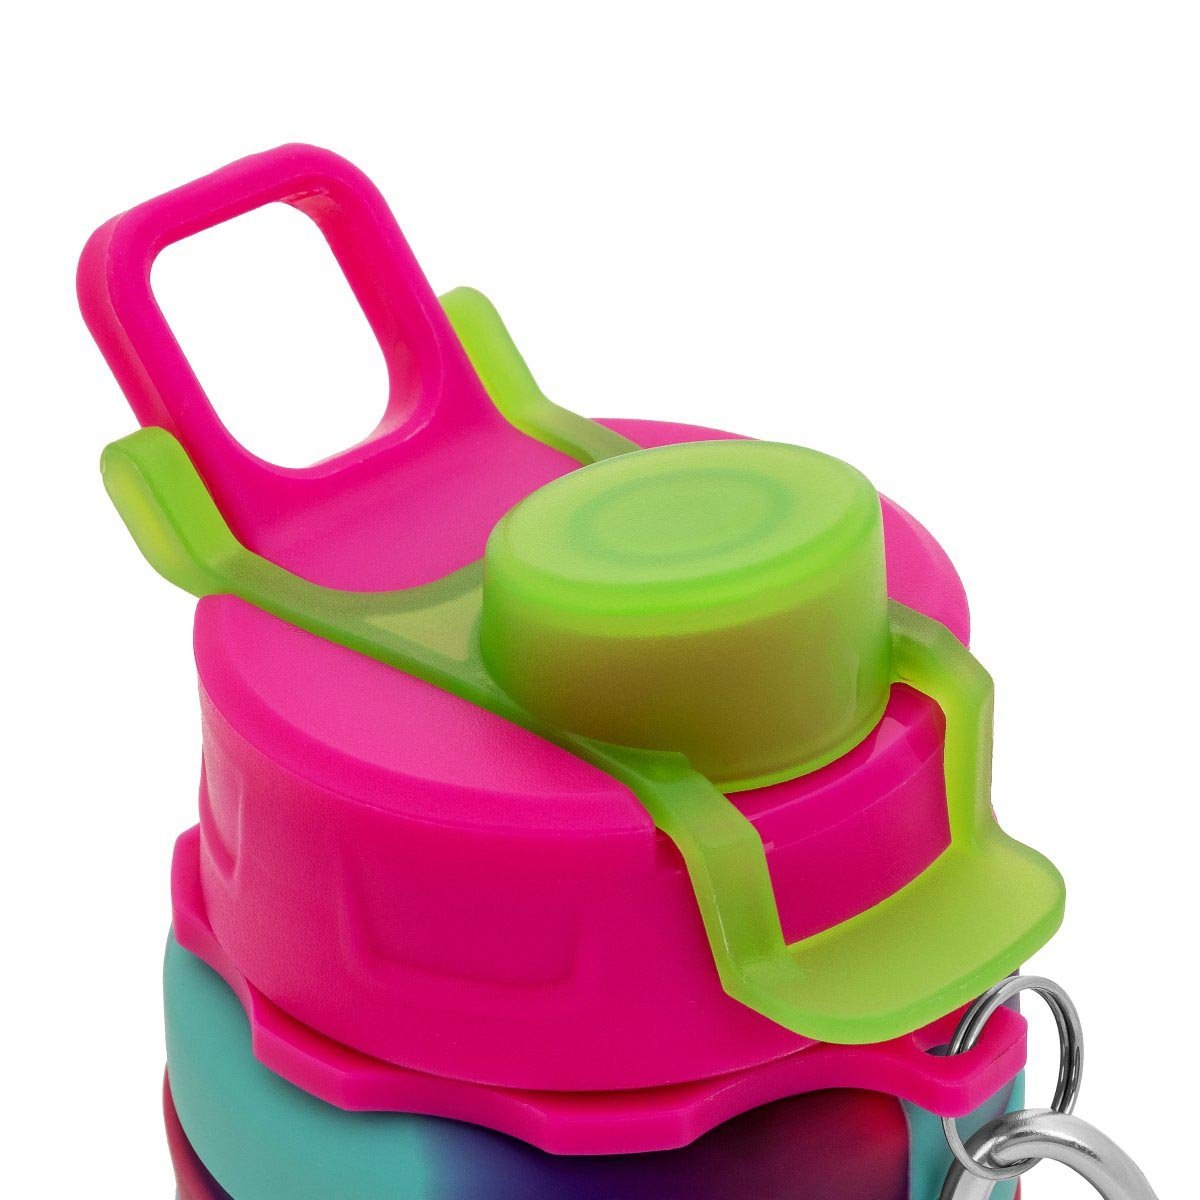 Portable Collapsible Silicone Water Bottle is equipped with a Straw Lid